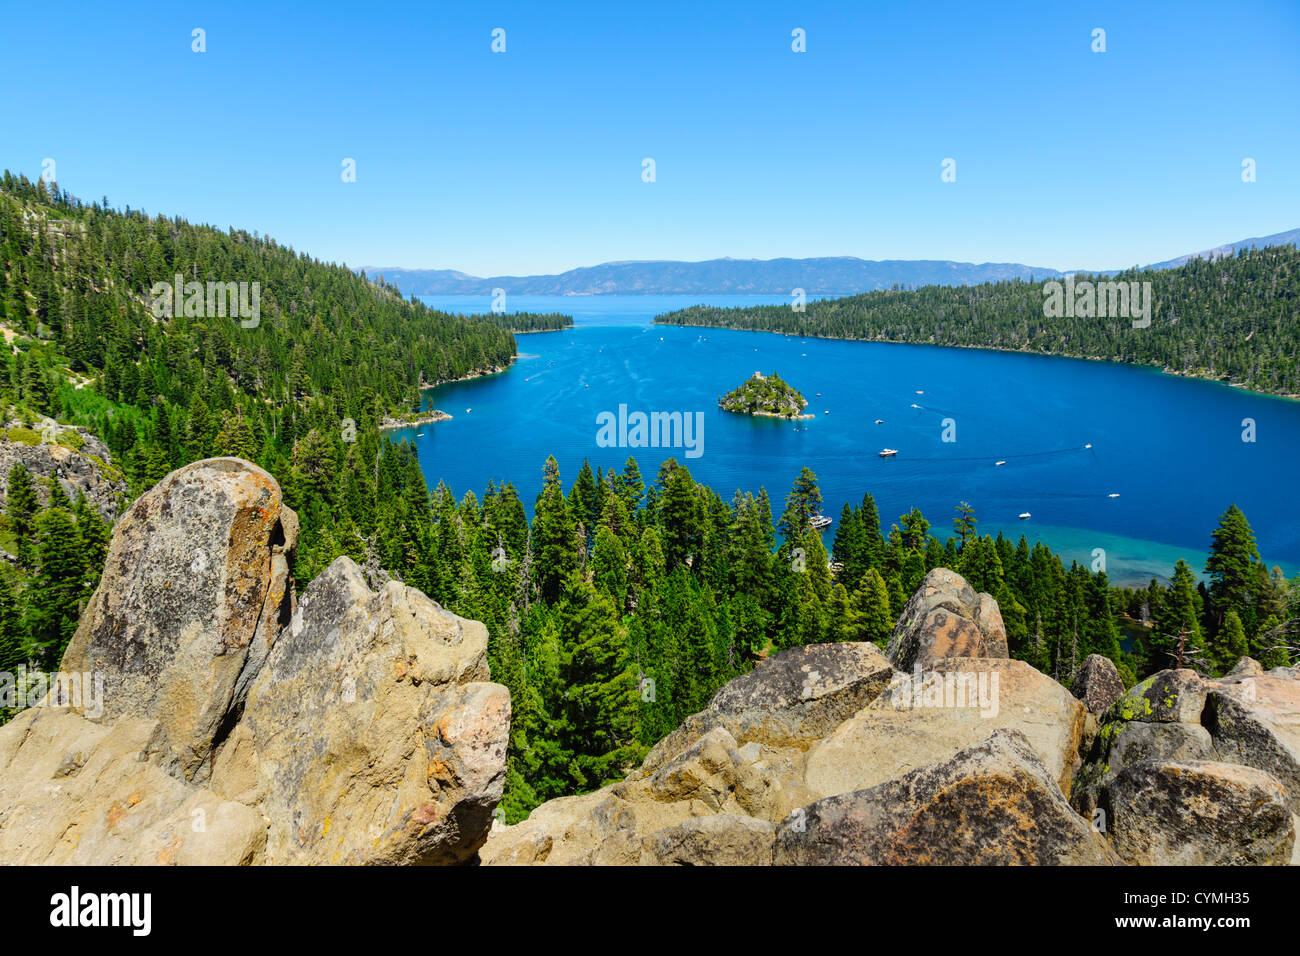 Lake Tahoe - Emerald Bay with Fannette Island. Stock Photo